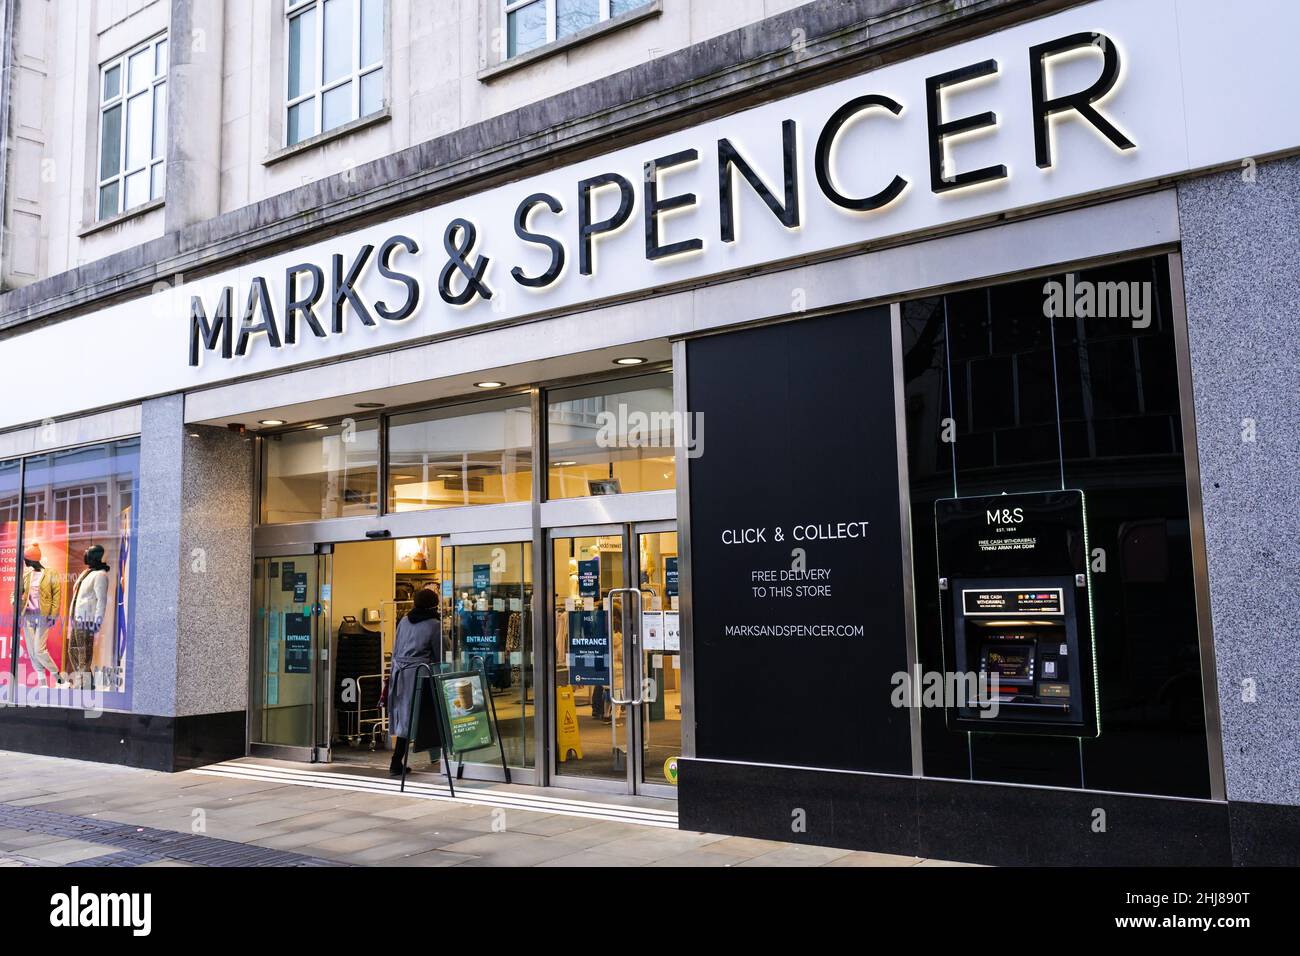 Marks and Spencer shop front with brand logo. Swansea, Wales, UK - January 16, 2022 Stock Photo